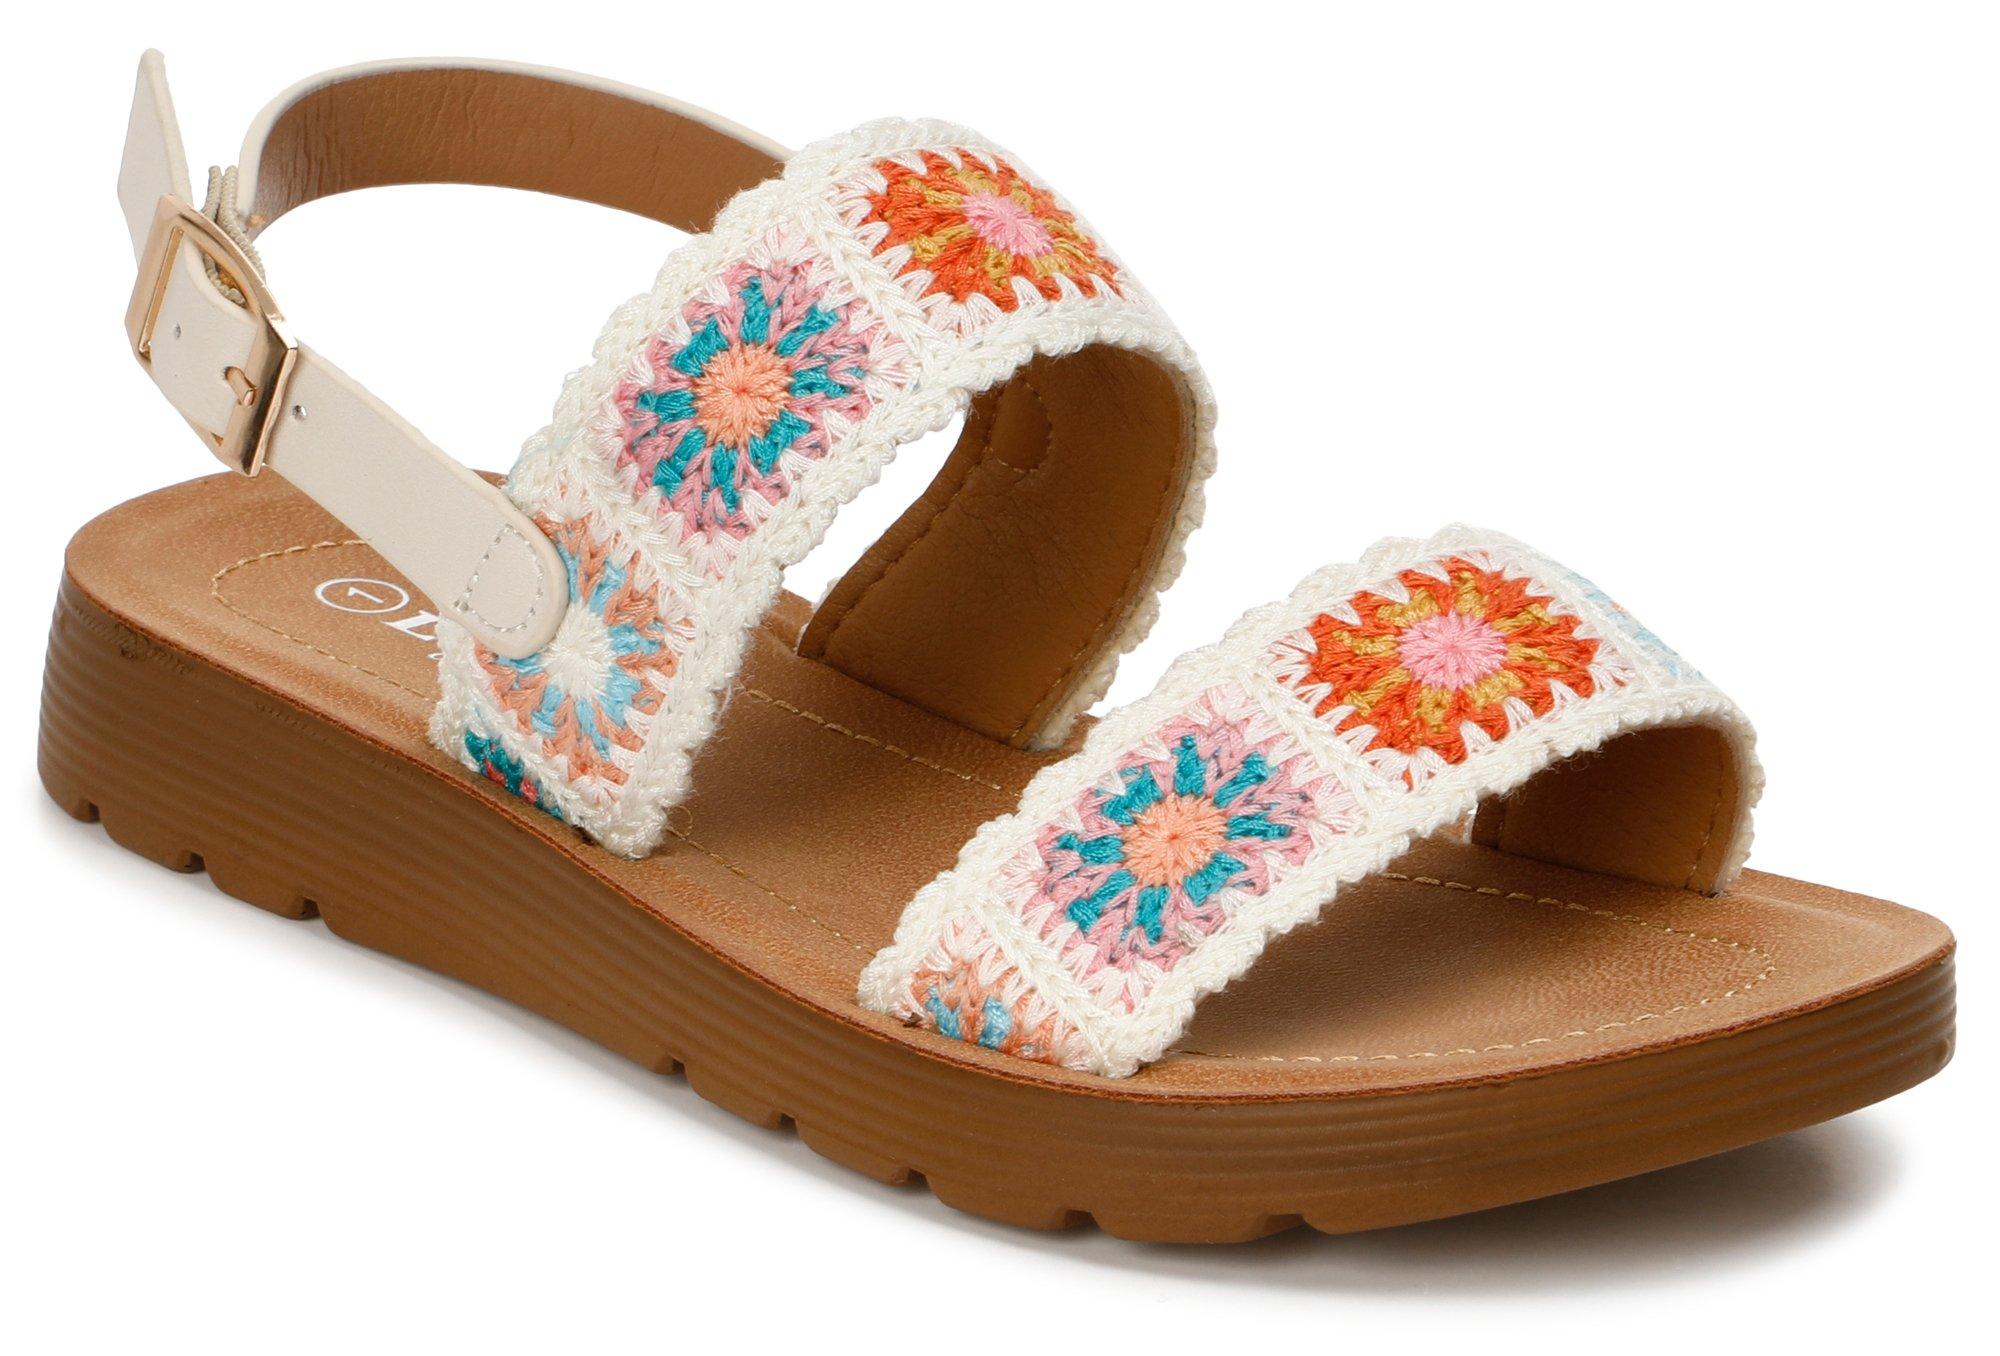 Girls Floral Crocheted Sandals